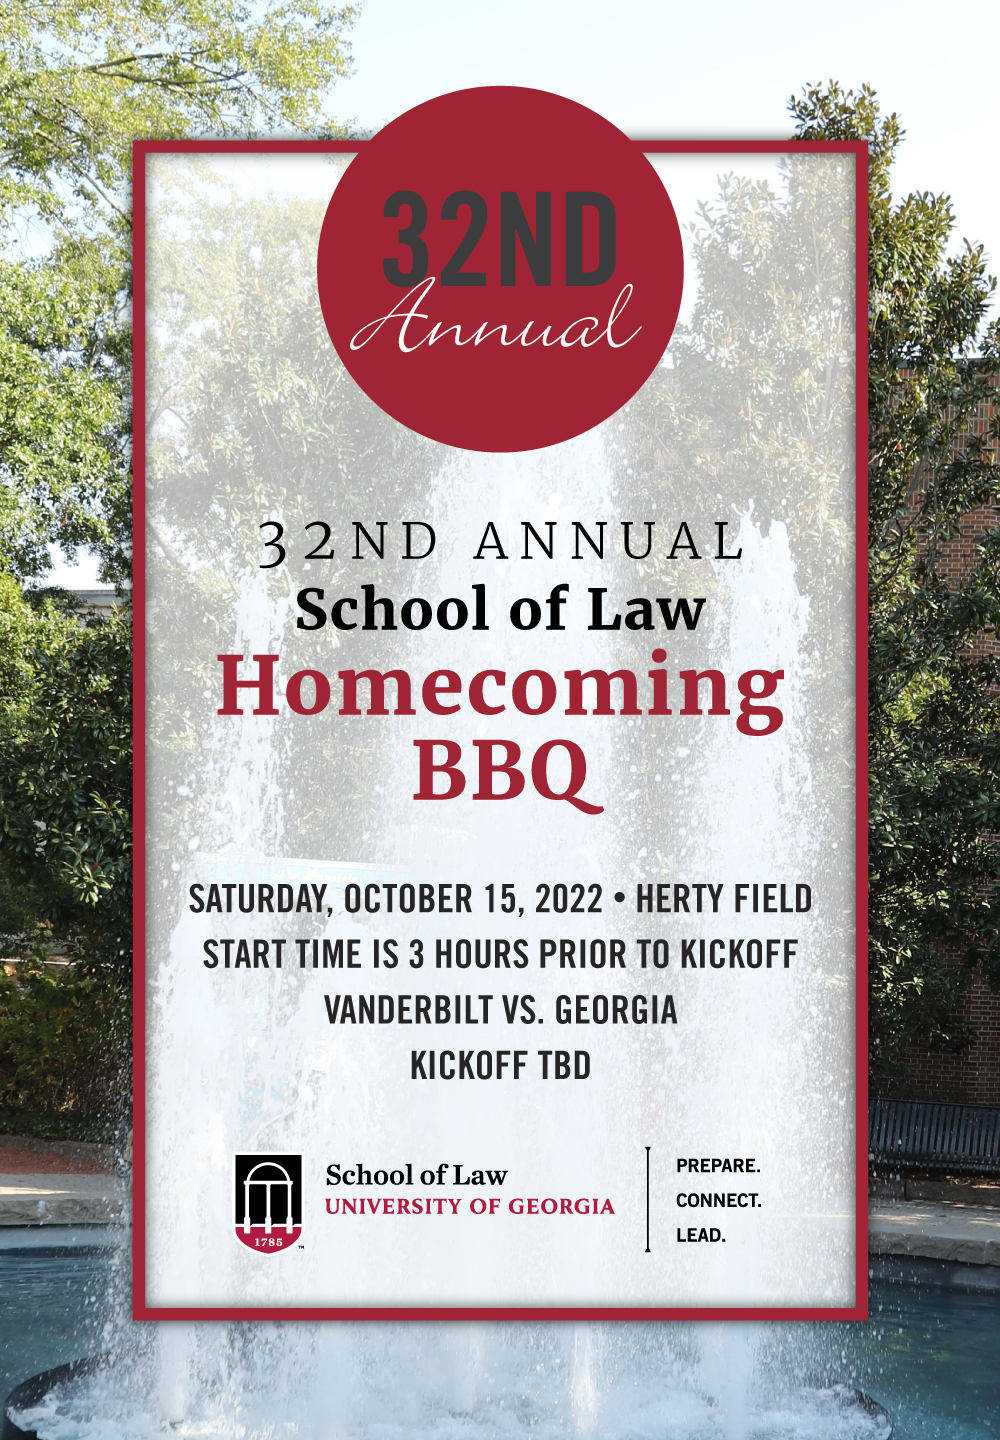 32nd Annual School of Law Homecoming BBQ, Saturday Oct 15, 2022. Herty Field. Starts 3 hours prior to kickoff